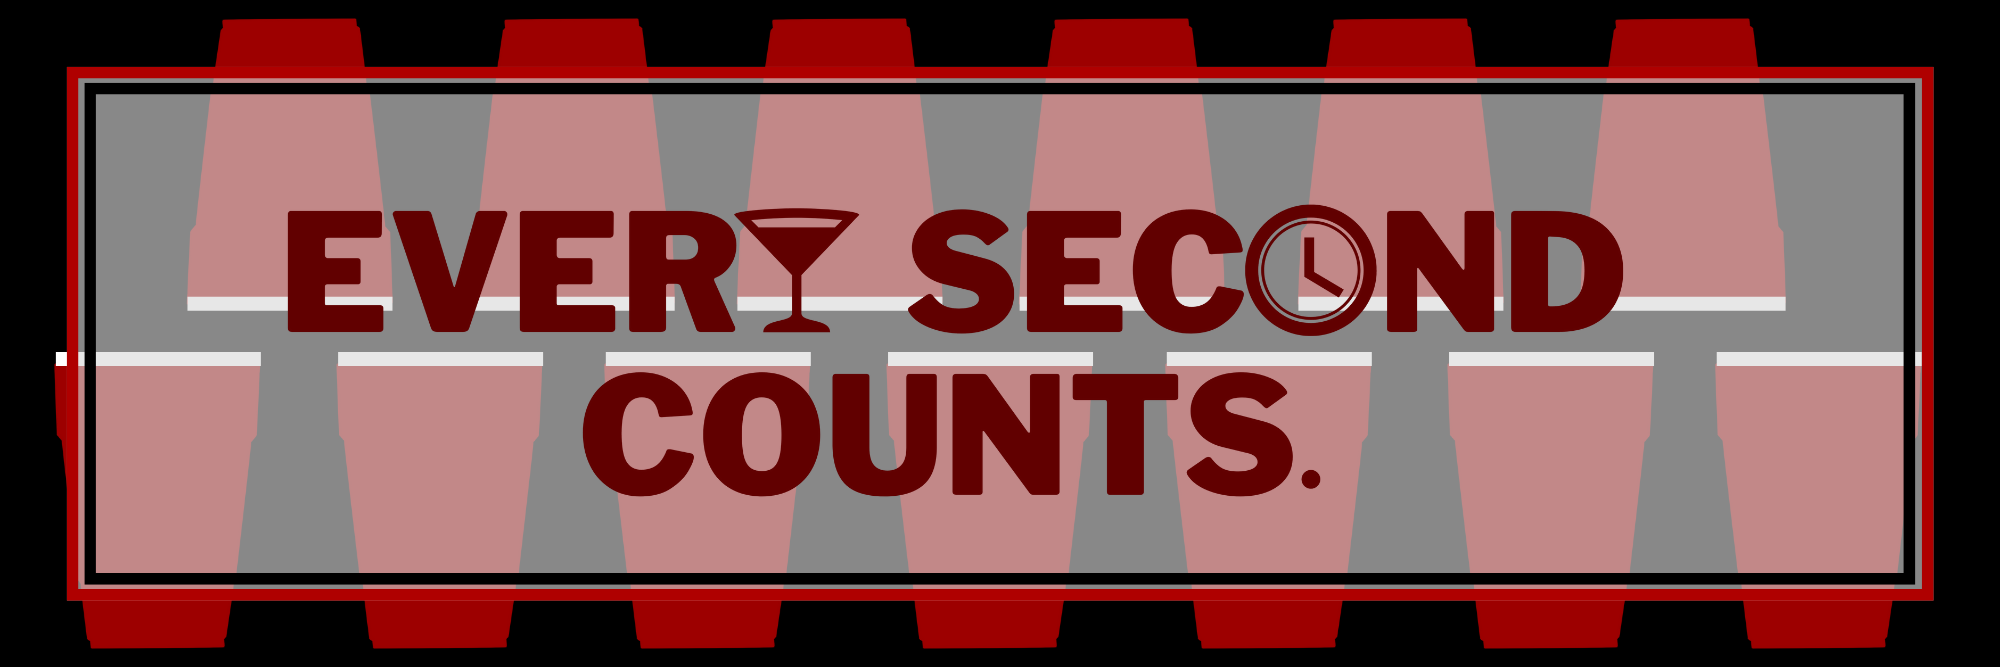 Red and black banner with red cups in the backgroud that says "every second counts"